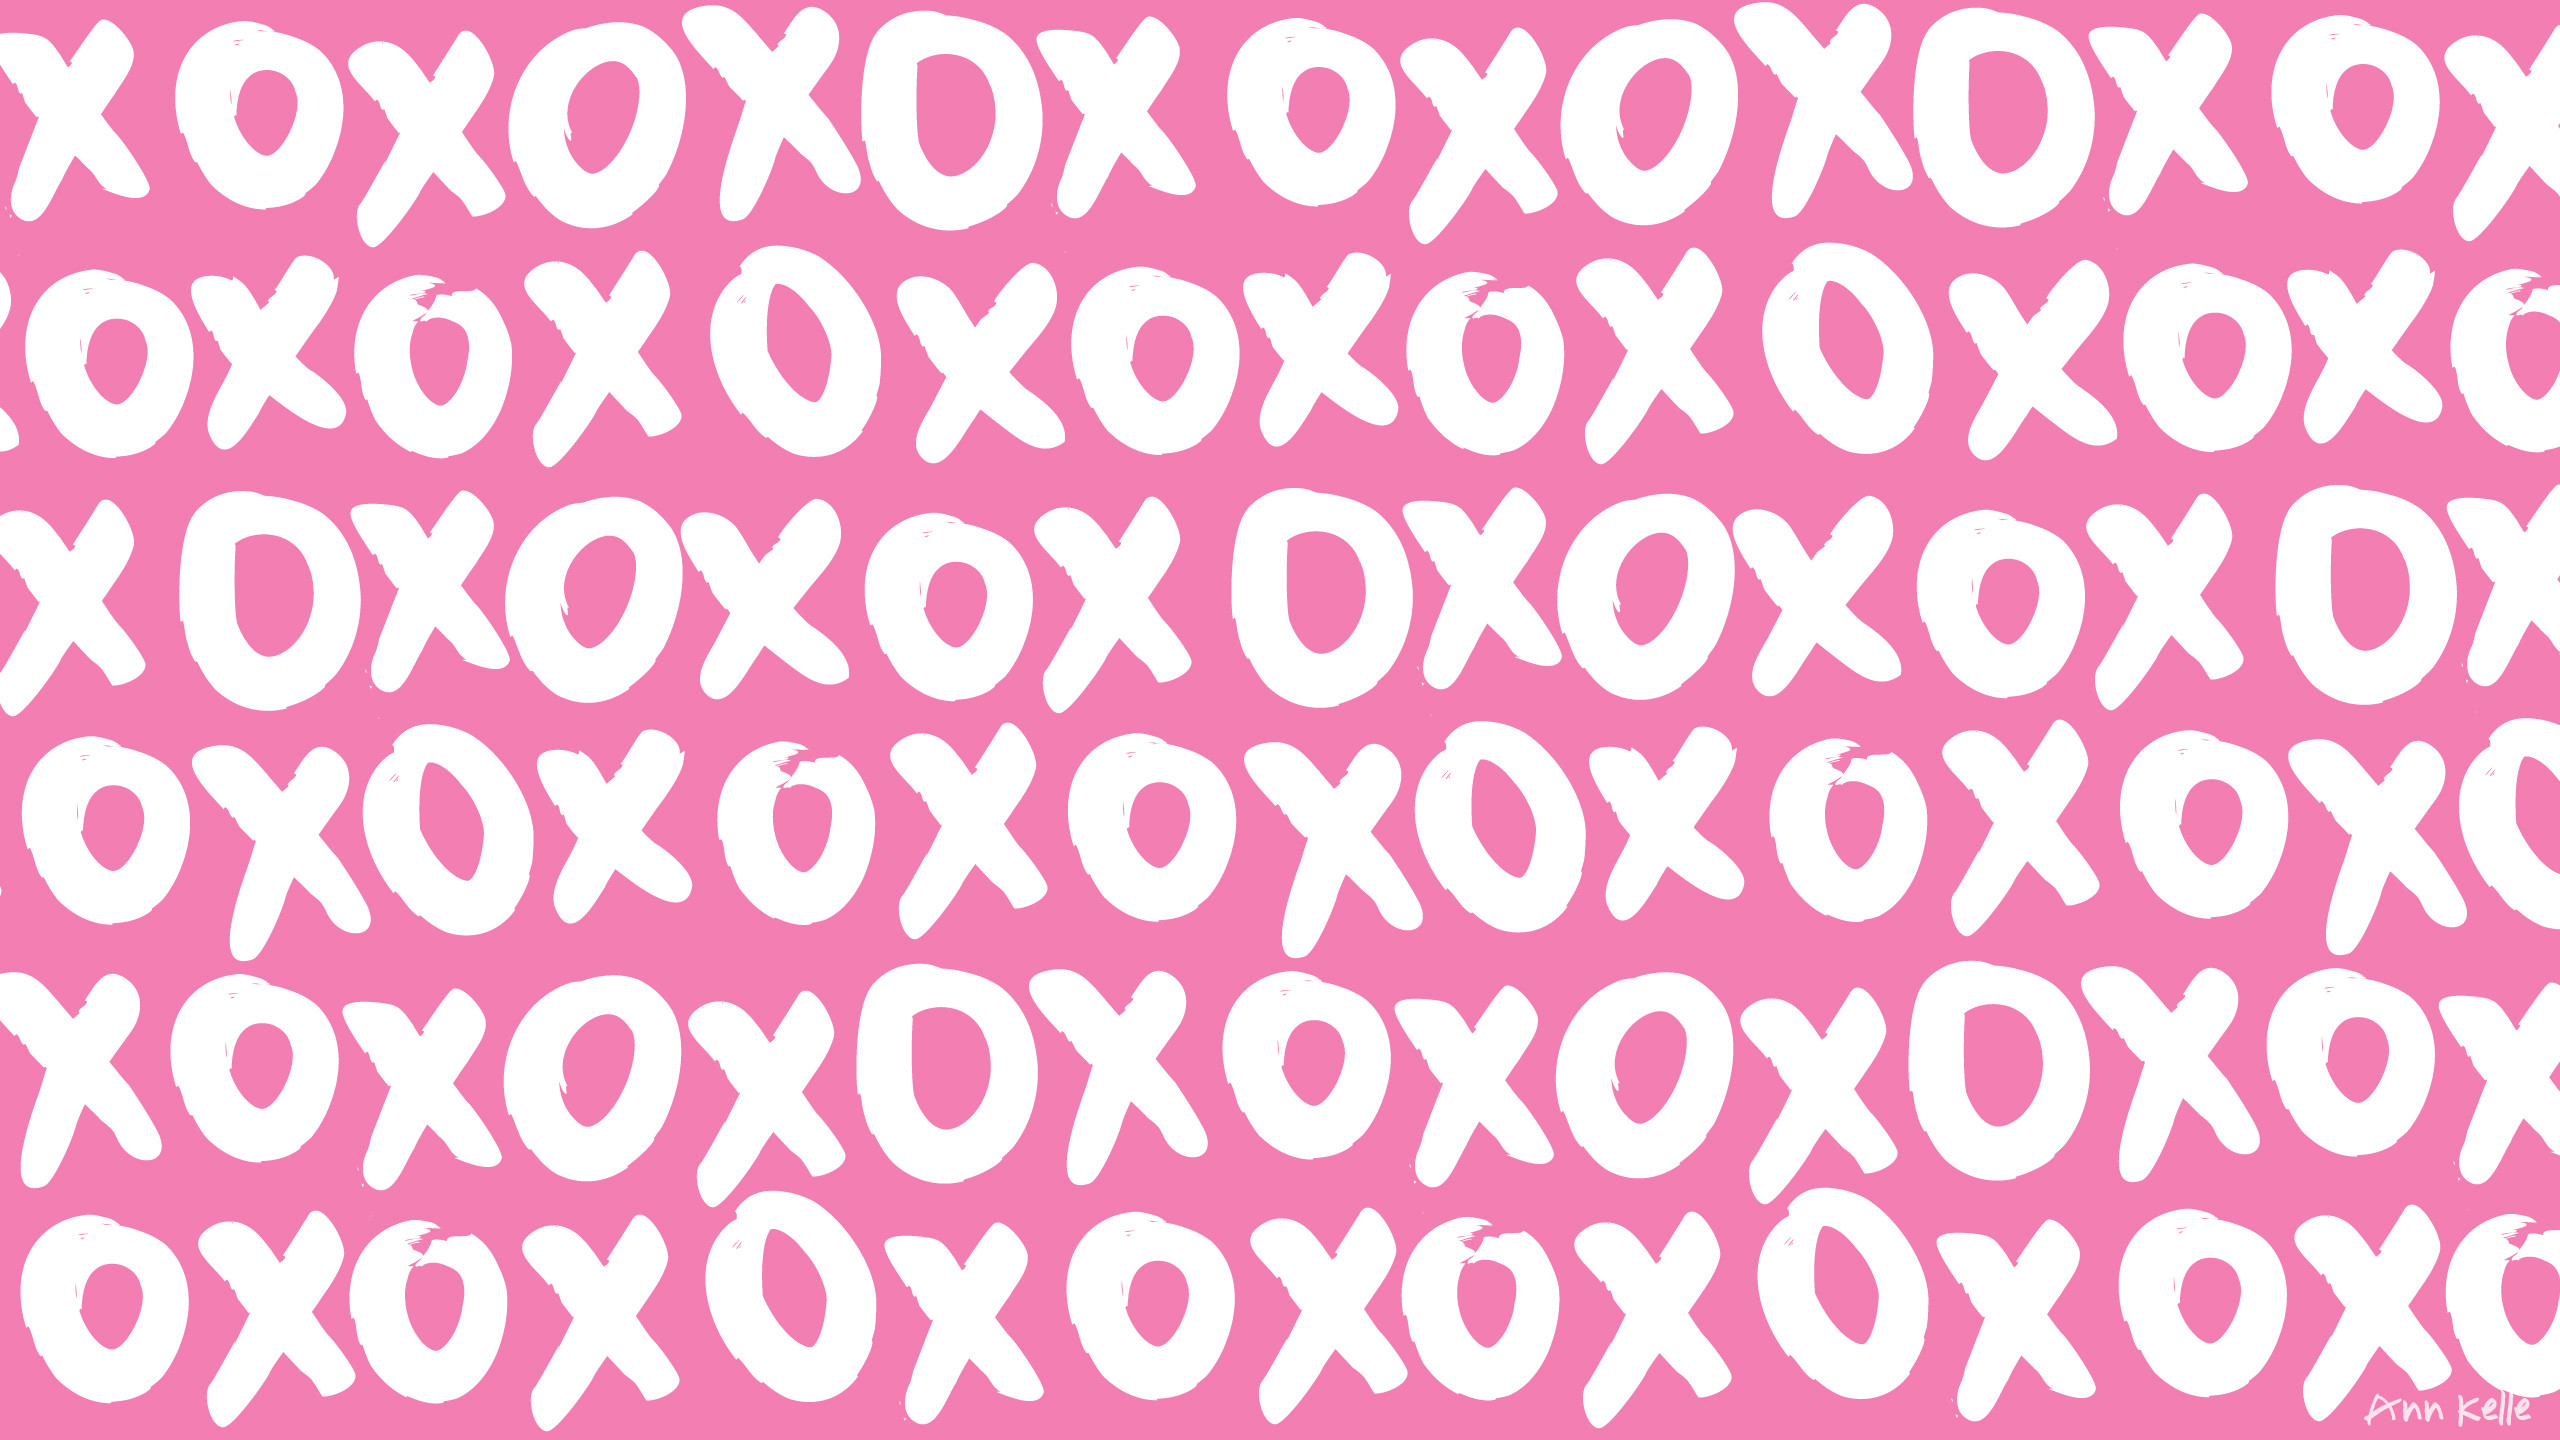 2560x1440 Download Pink XOXO HERE